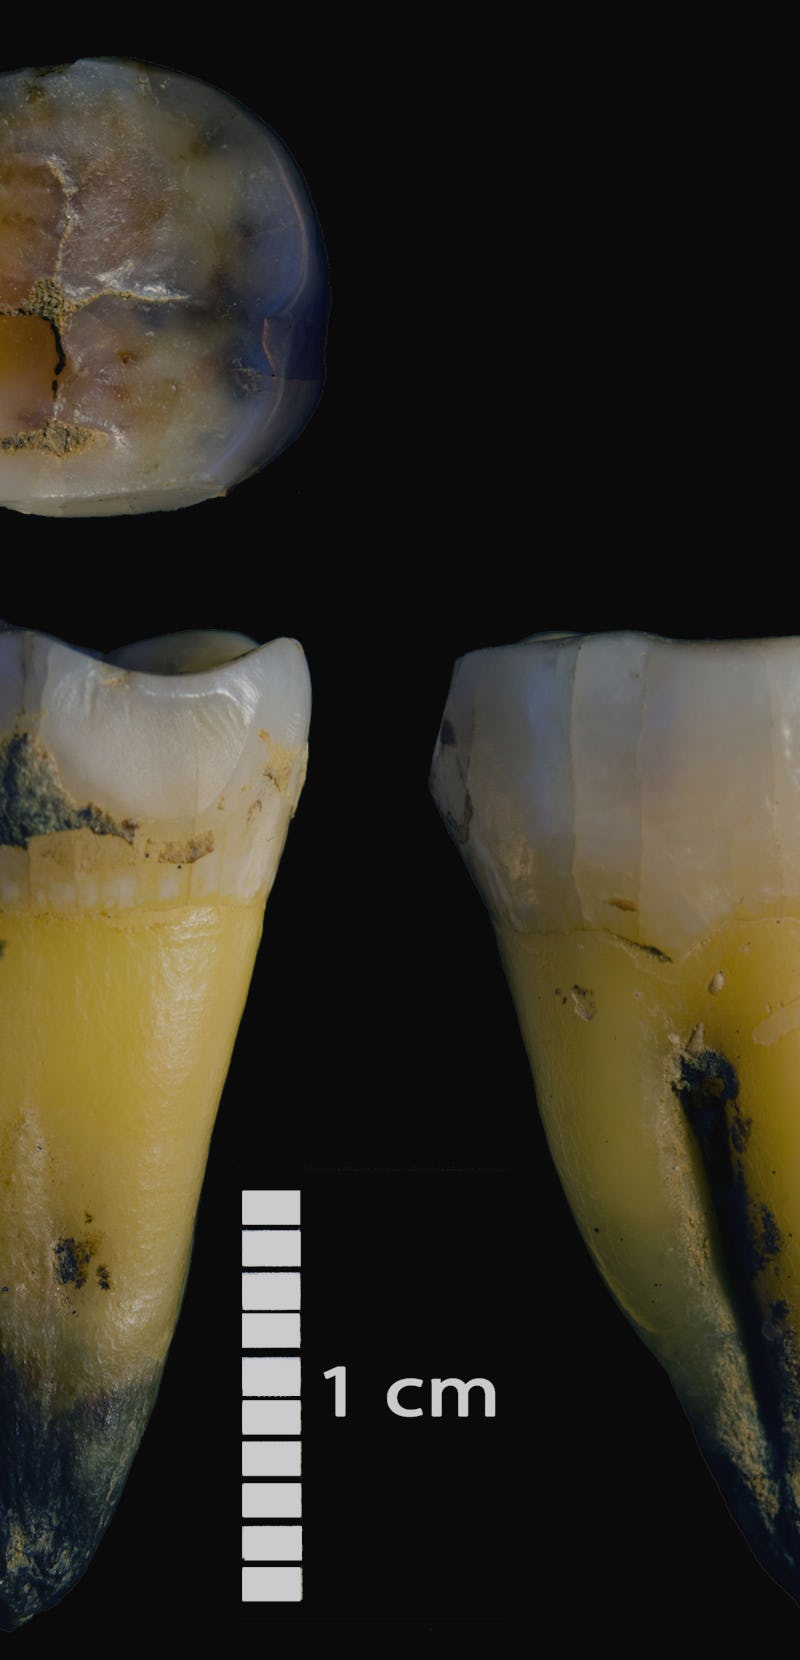 Second lower molar of a modern human found in Bacho Kiro Cave in the Main sector (ID: F6-620, Layer ...